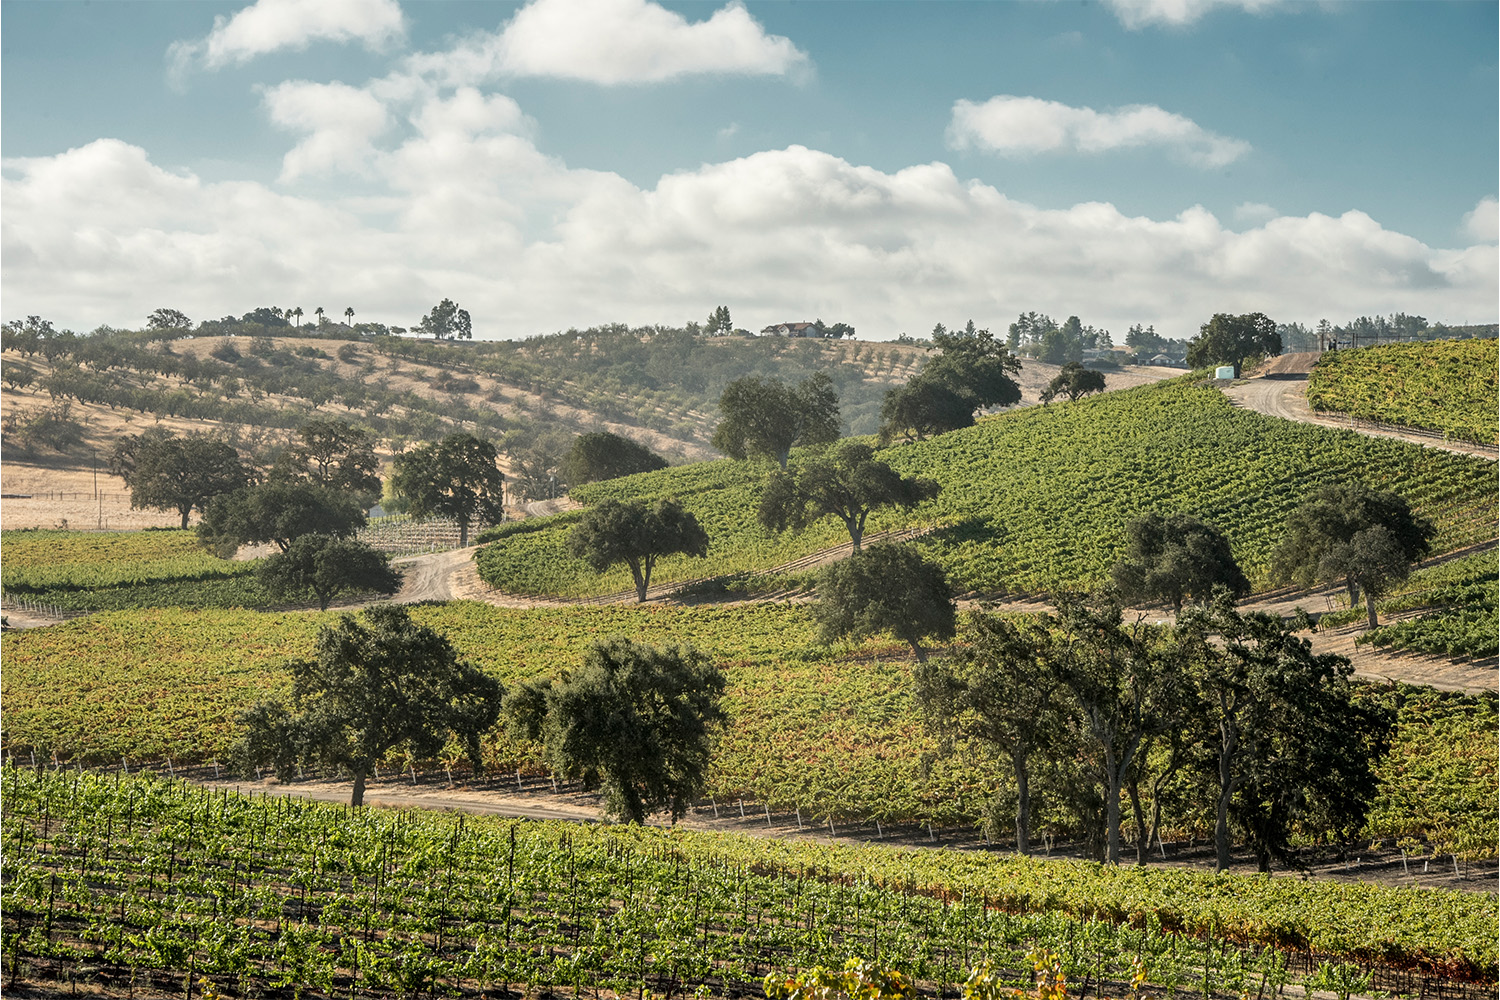 A vineyard in Paso Robles with trees dotting the hillside under a blue sky with white clouds